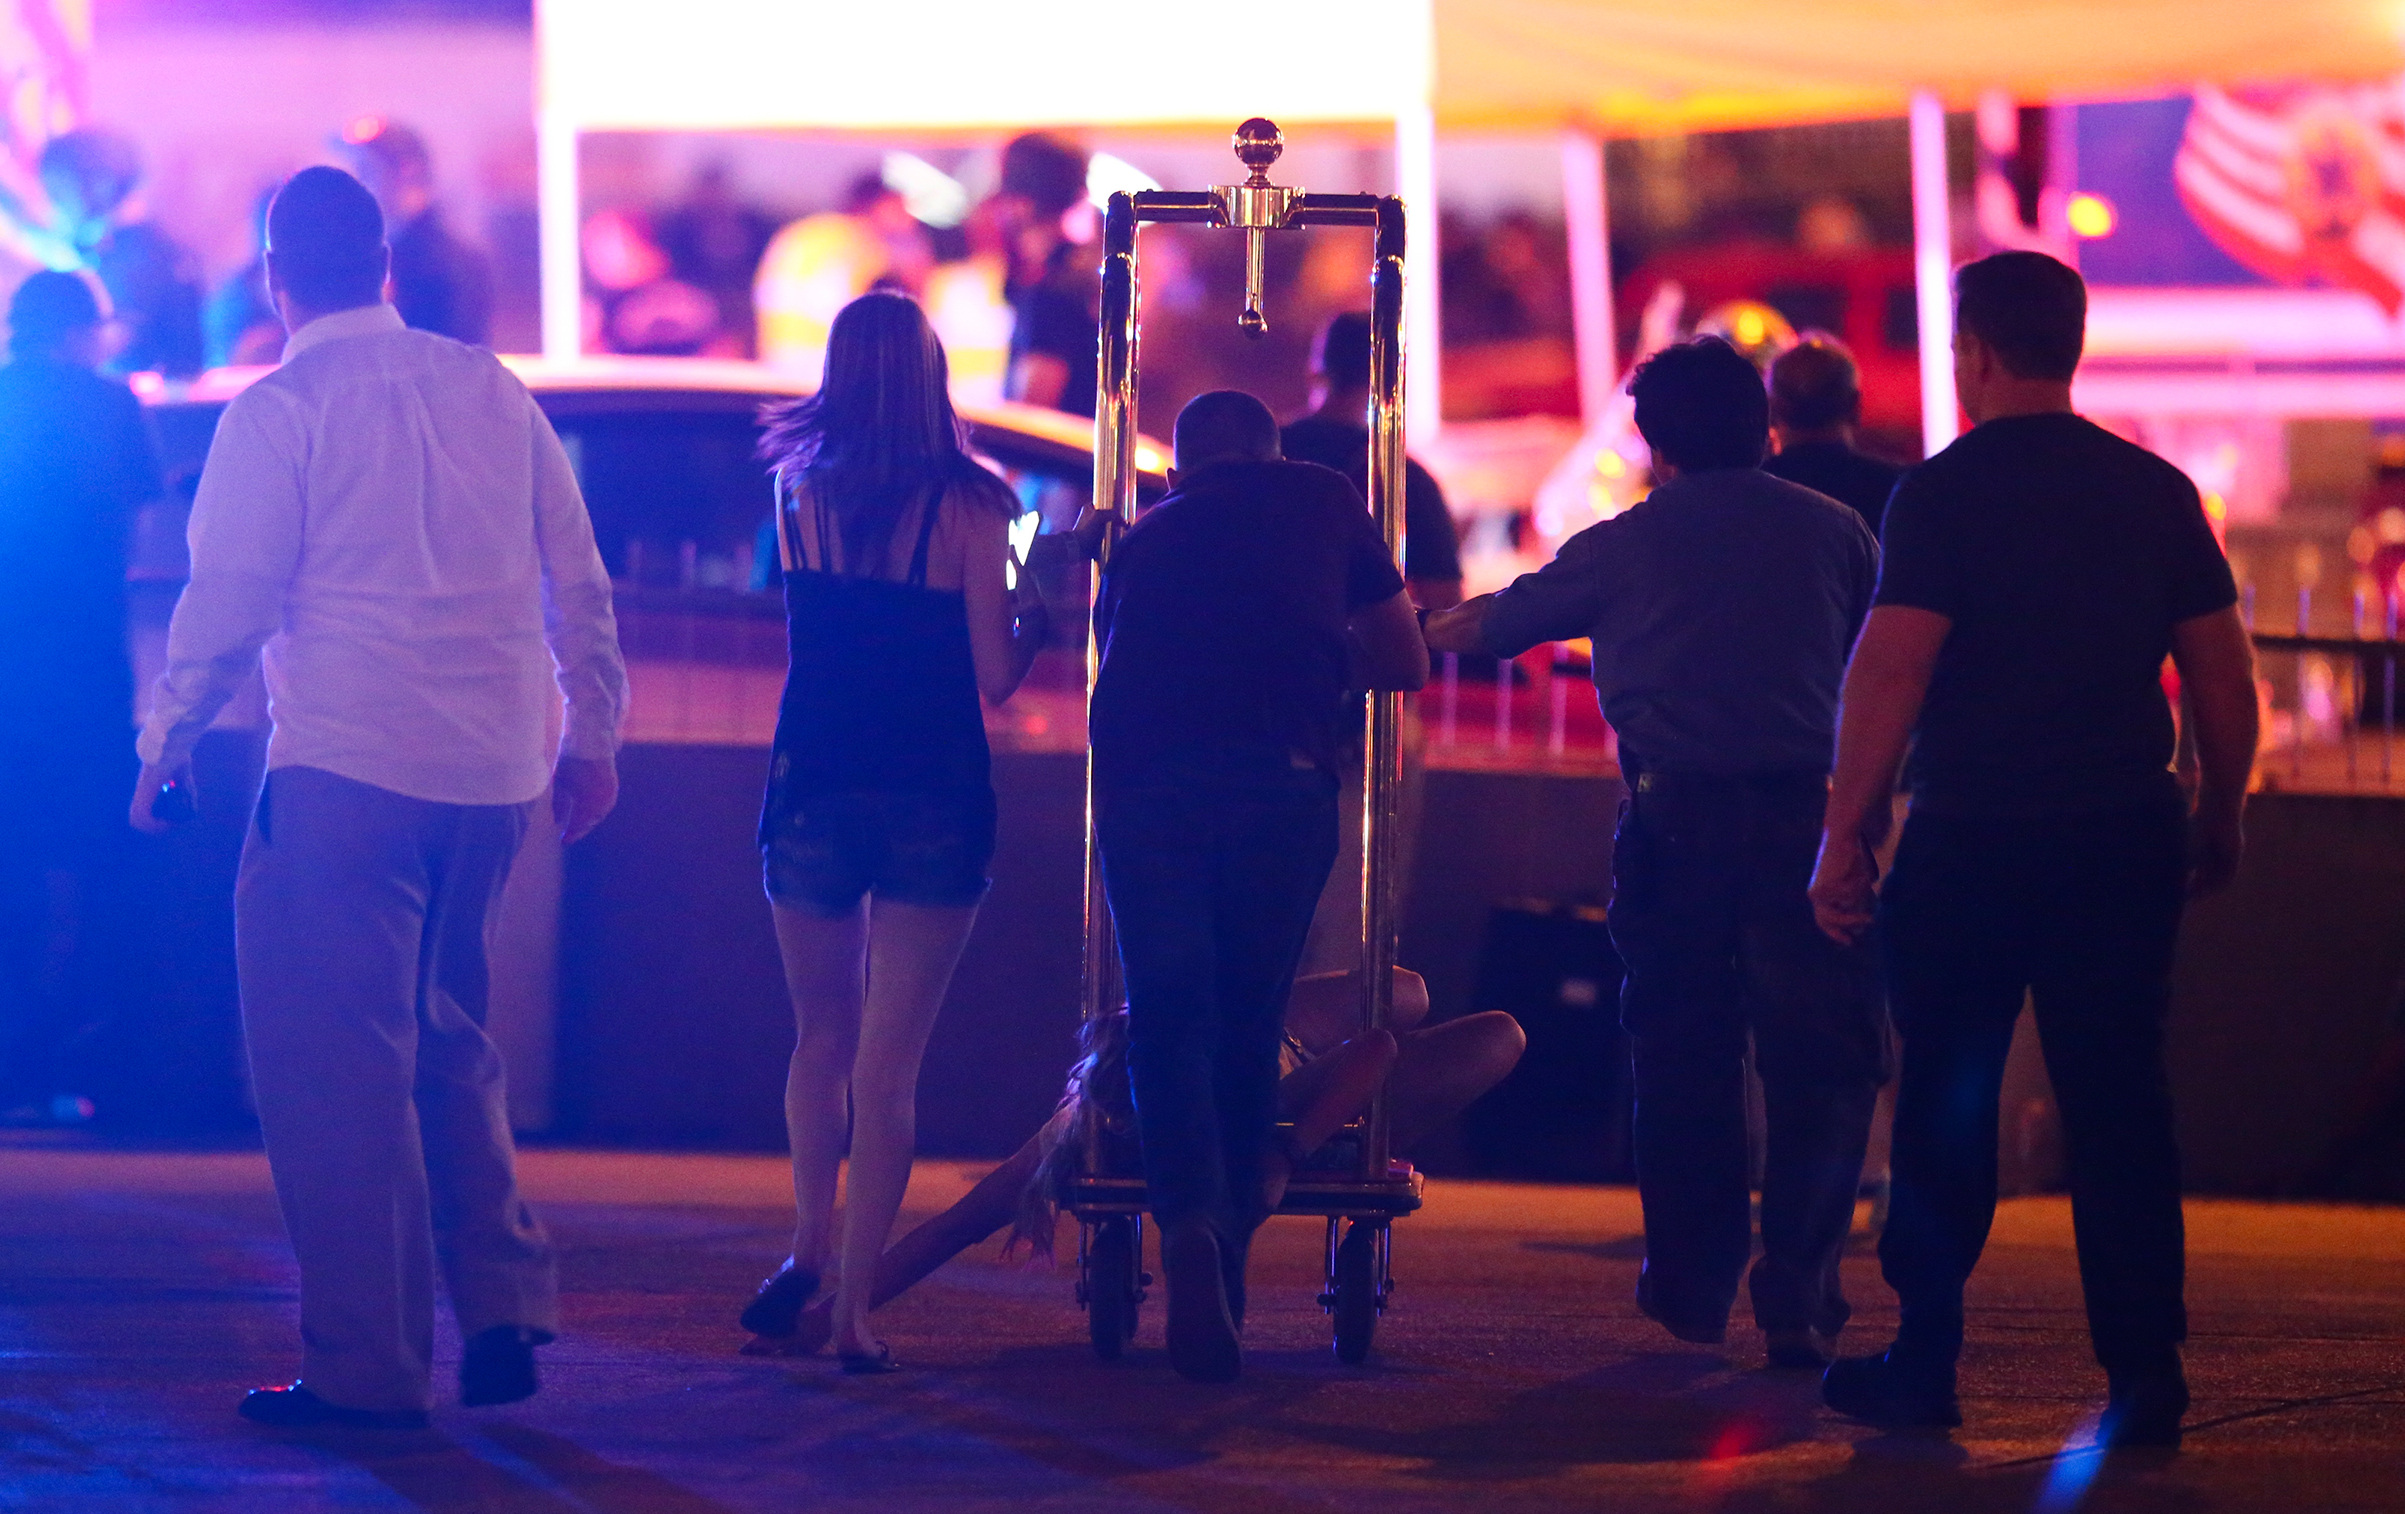 A wounded woman is transported outside the Tropicana during an active shooter situation on the Las Vegas Strip on Oct. 1, 2017. (Chase Stevens—Las Vegas Review-Journal/AP)